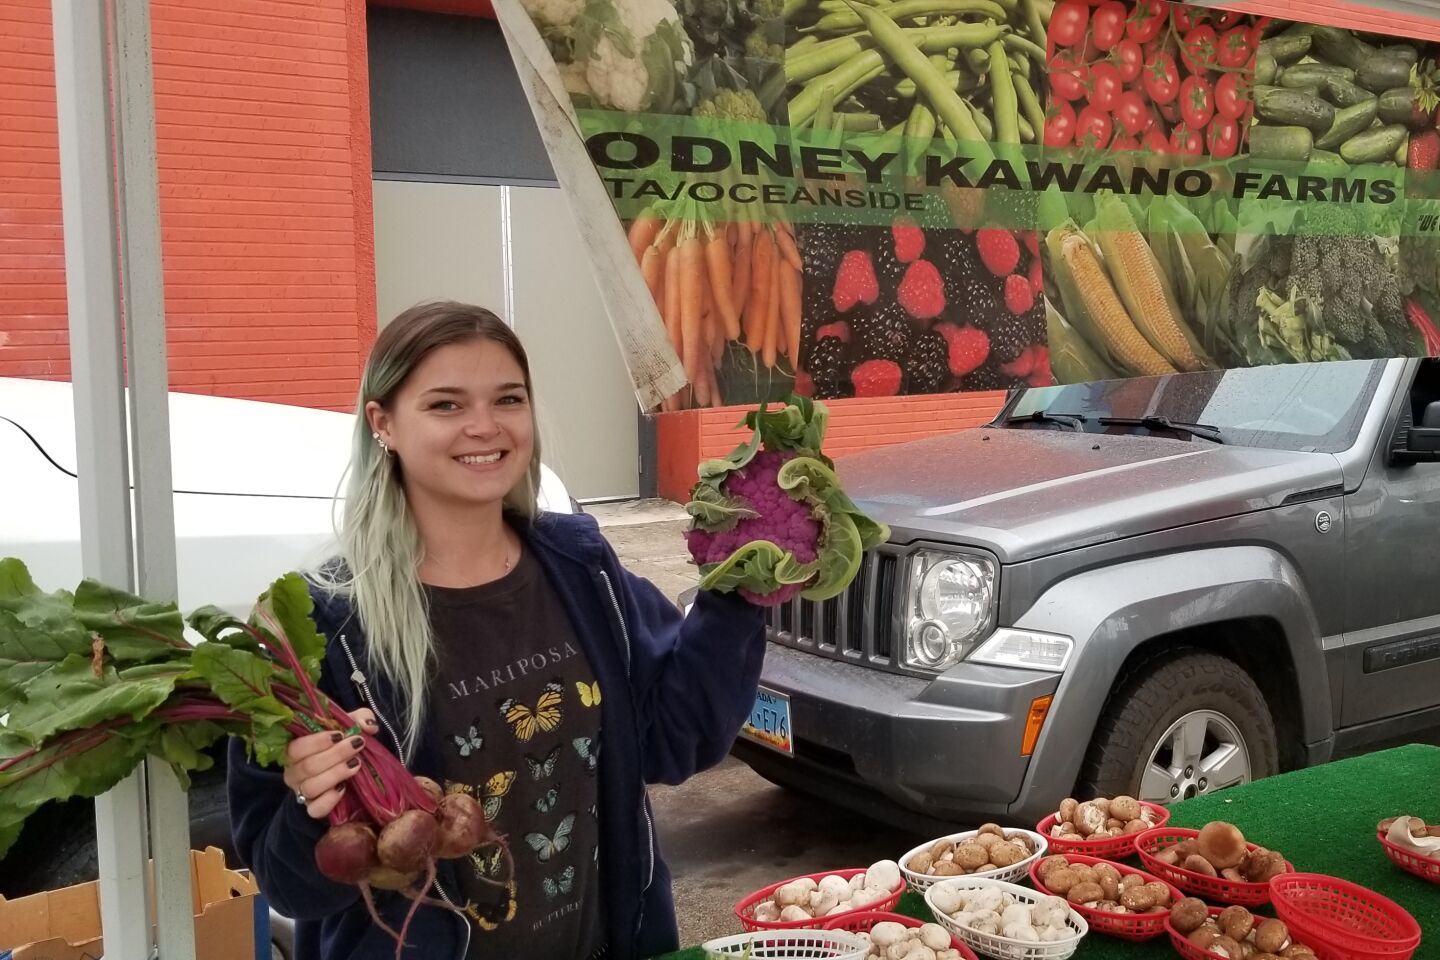 Courtlynn S. poses with produce from Rodney Kawano Farm.